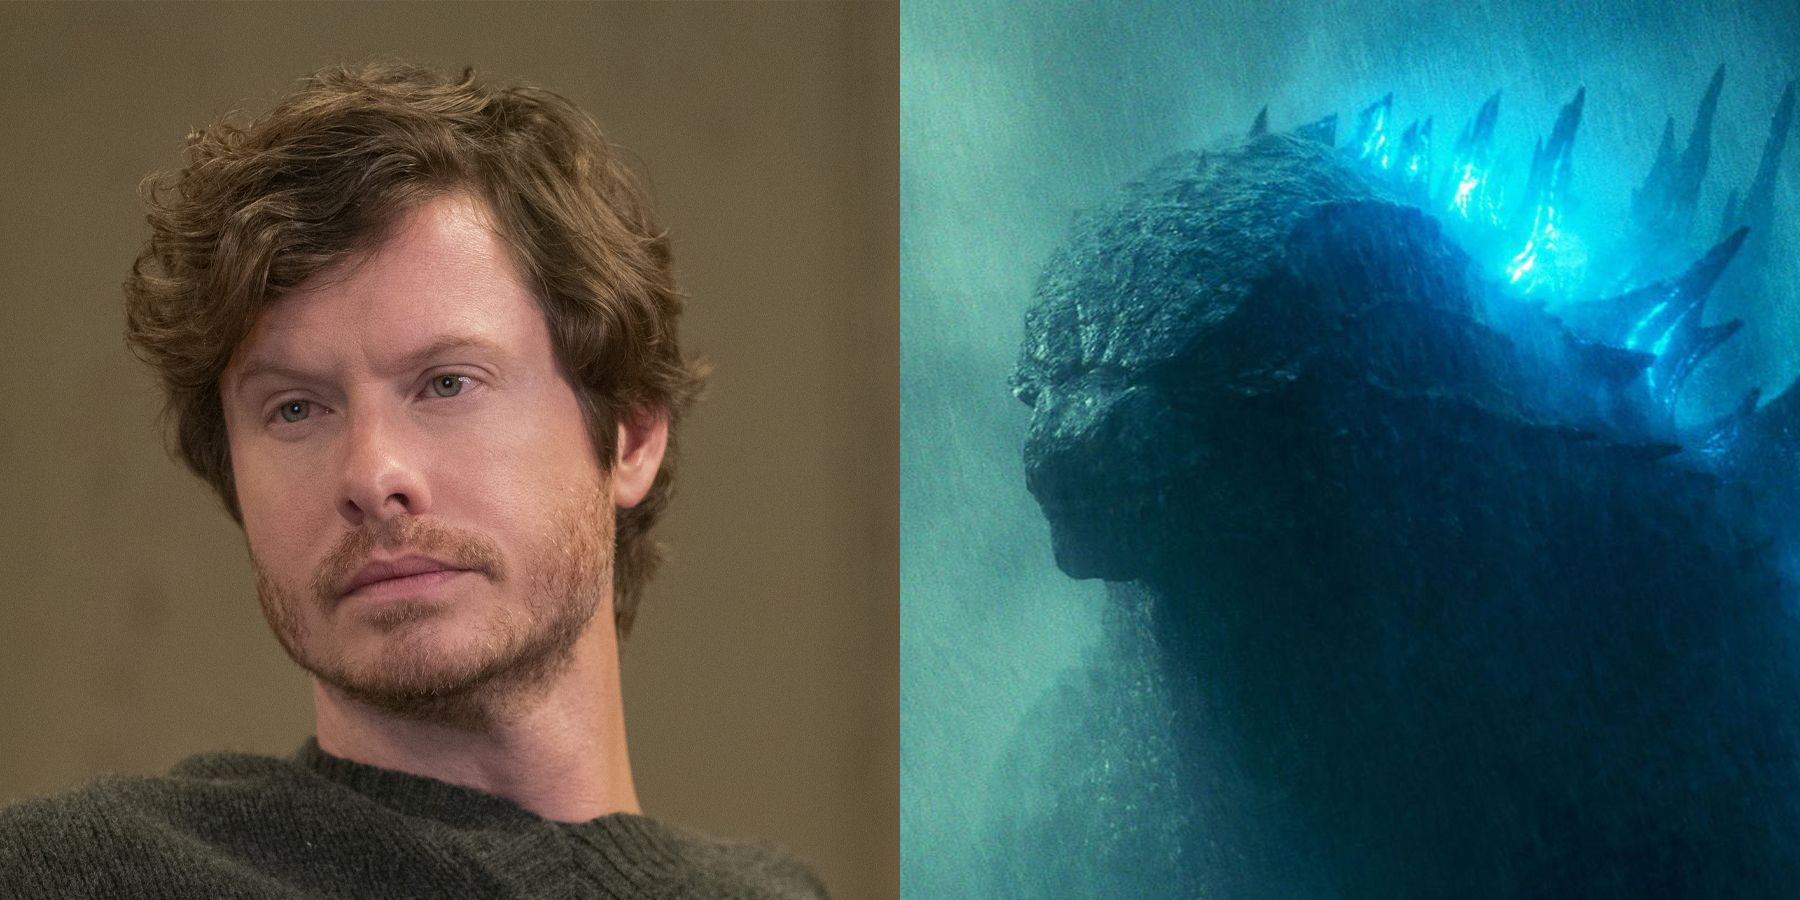 Godzilla and Titans Anders Holm Apple TV Plus